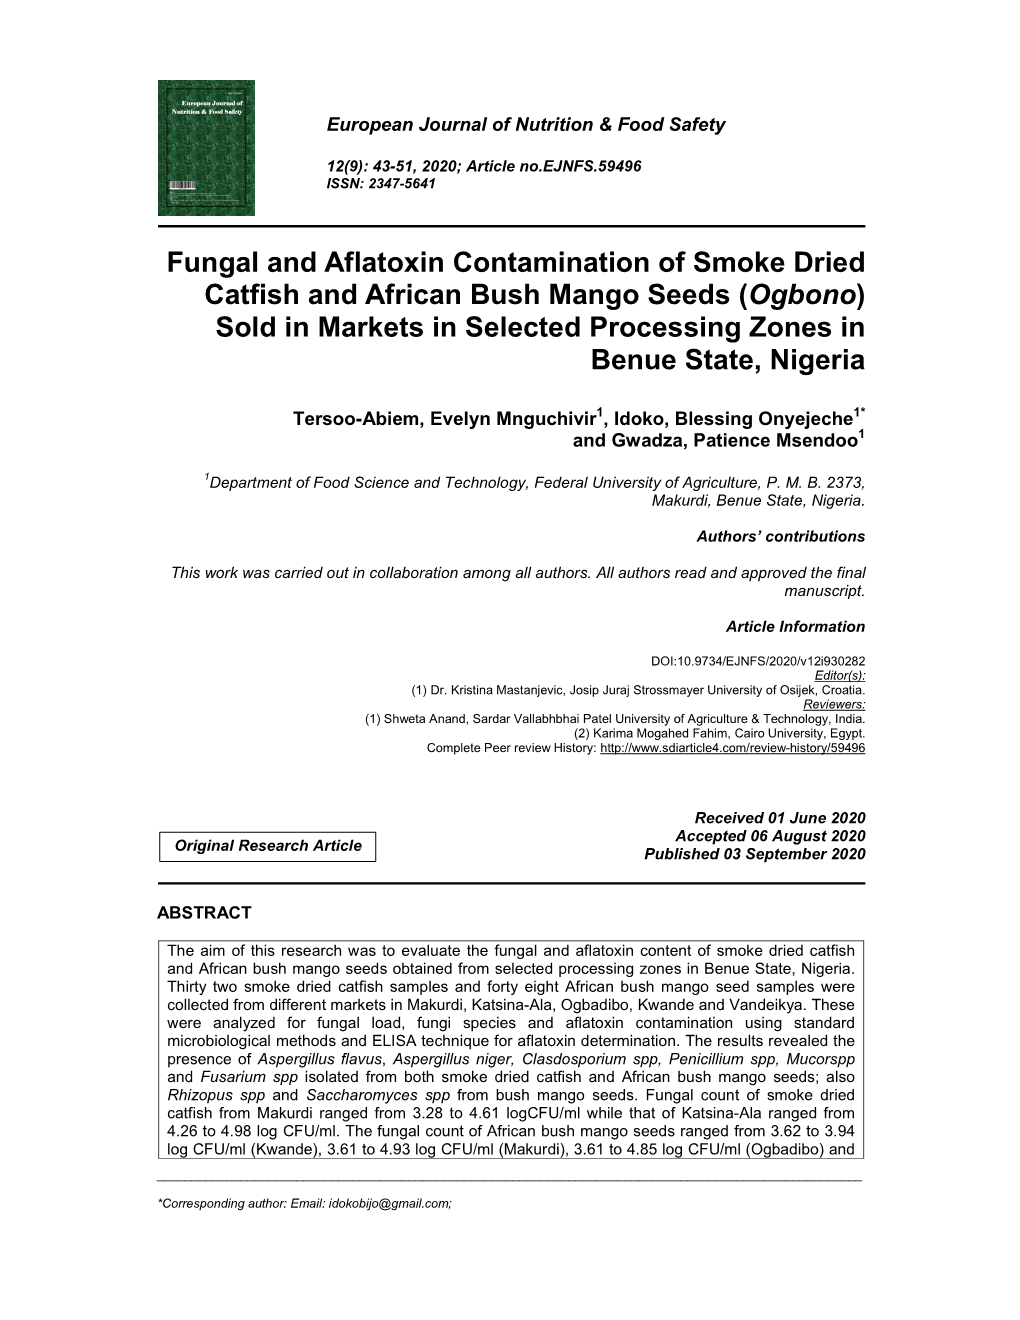 Fungal and Aflatoxin Contamination of Smoke Dried Catfish and African Bush Mango Seeds (Ogbono) Sold in Markets in Selected Processing Zones in Benue State, Nigeria